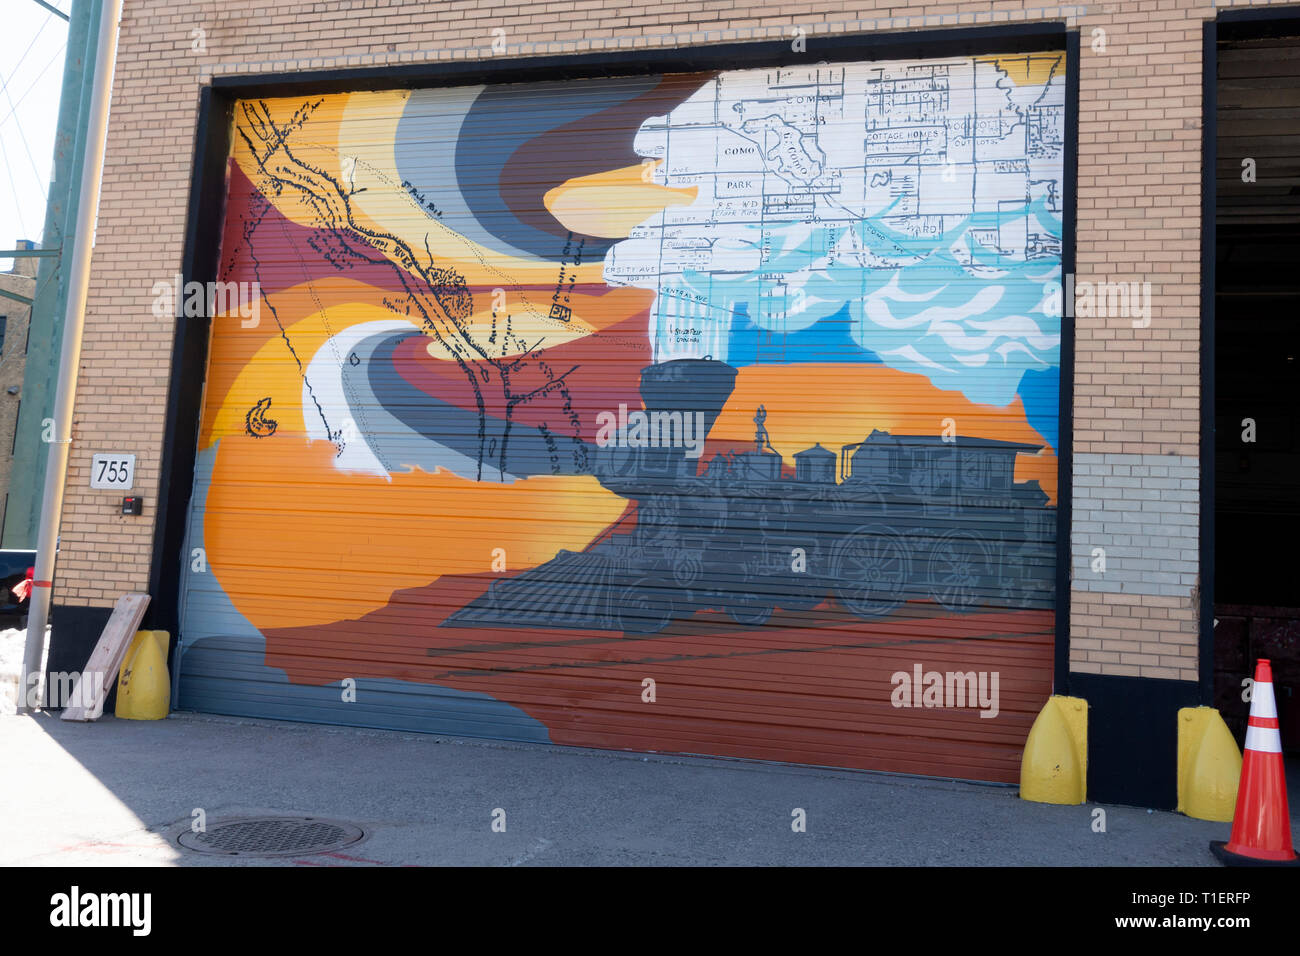 Garage door painted with Locomotive steam engine depicting the heart of railroad and industry located in the Midway area. St Paul Minnesota MN USA Stock Photo